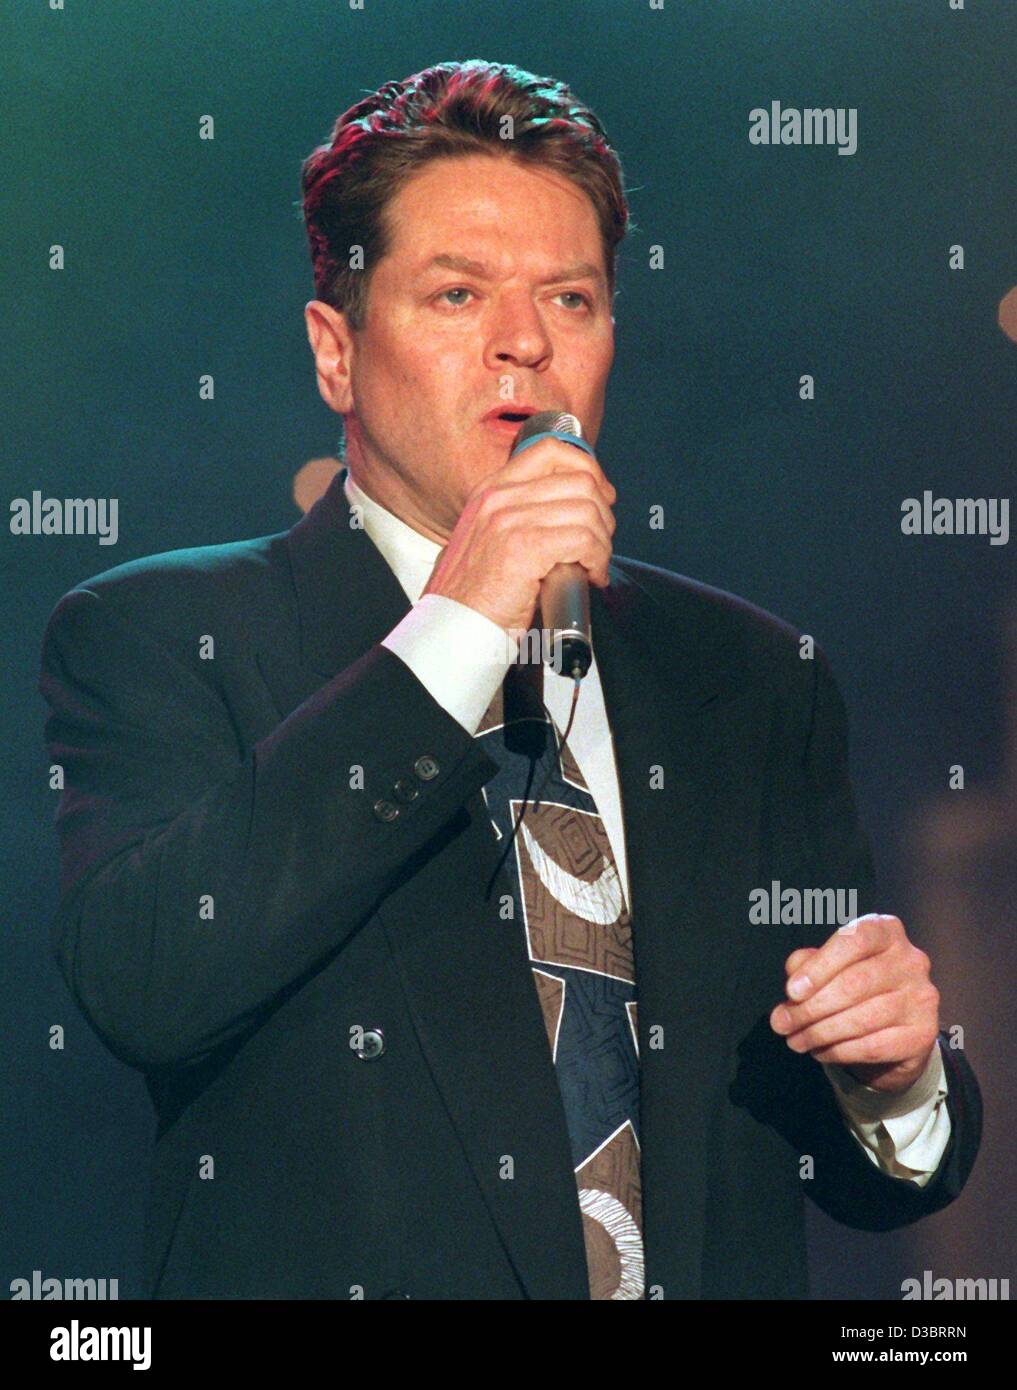 (dpa files) - British pop singer Robert Palmer performs during a show in Baden-Baden, Germany, 17 March 1995. Palmer died on 26 September 2003 in Paris at the age of 54 of a heart attack, his manager reporter. Among the biggest hits of Palmer was the song 'Addicted to Love'. Stock Photo